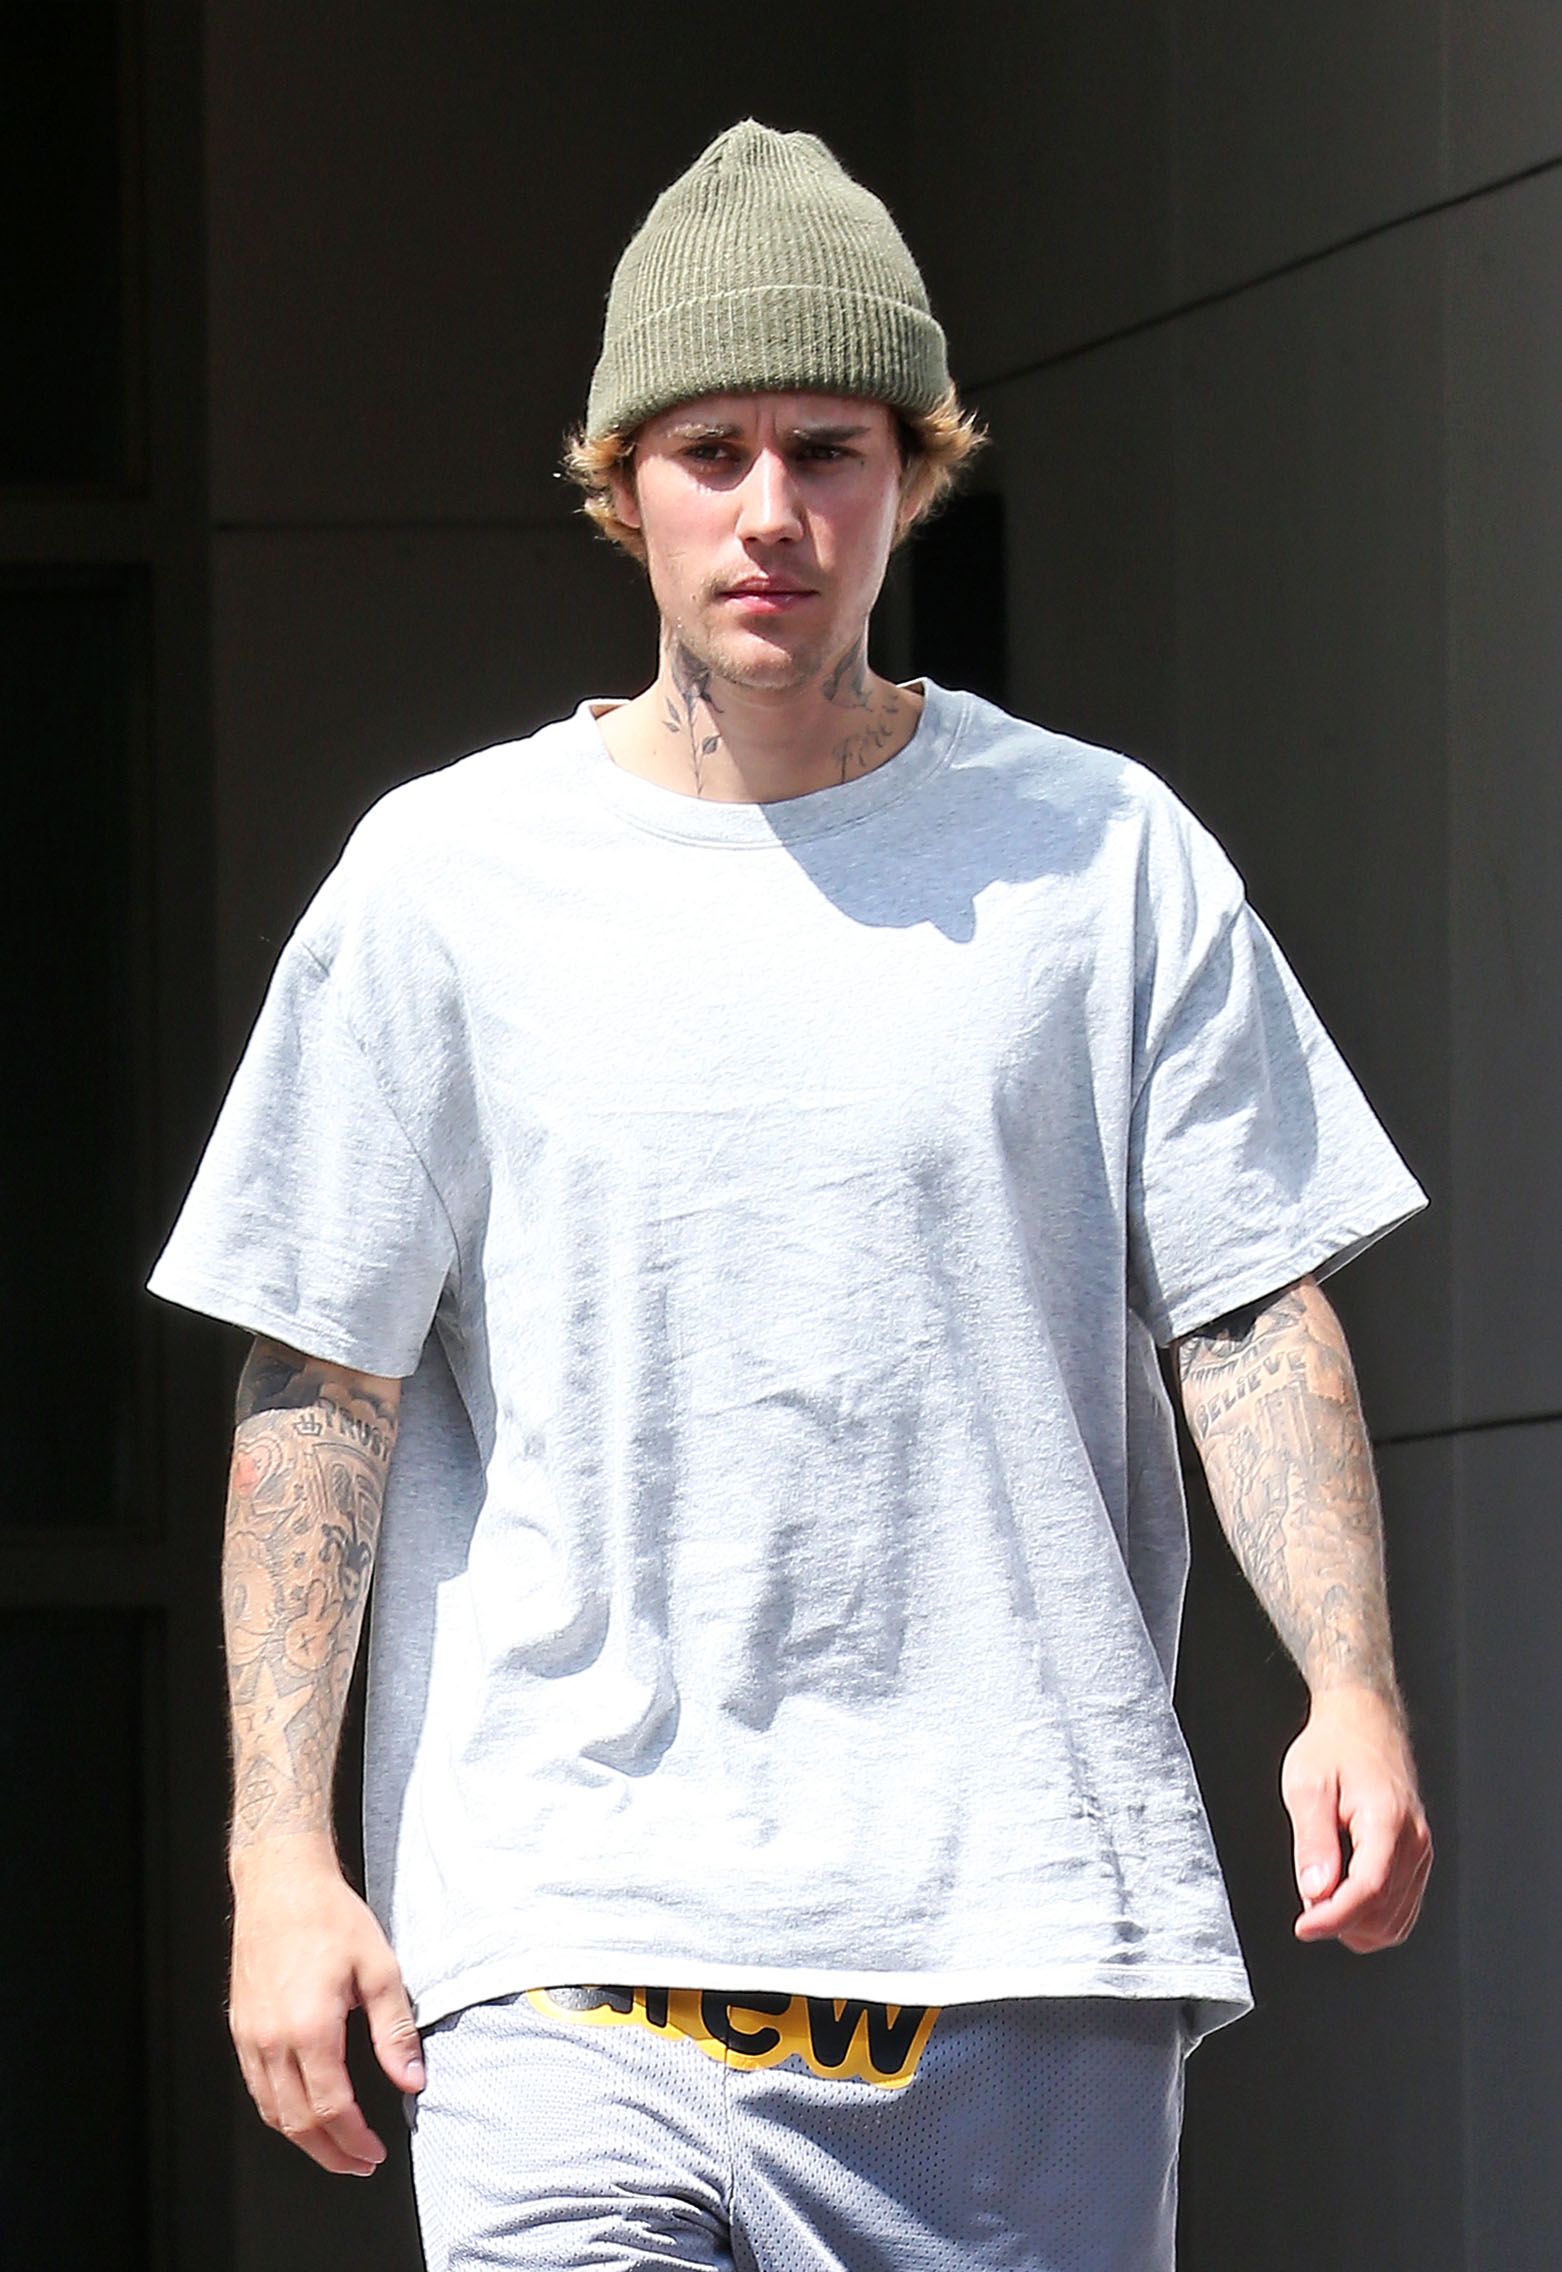 Justin Bieber seen taking a walk on September 18, 2020, in Los Angeles, California | Photo: CrownMedia/MEGA/GC Images/Getty Images